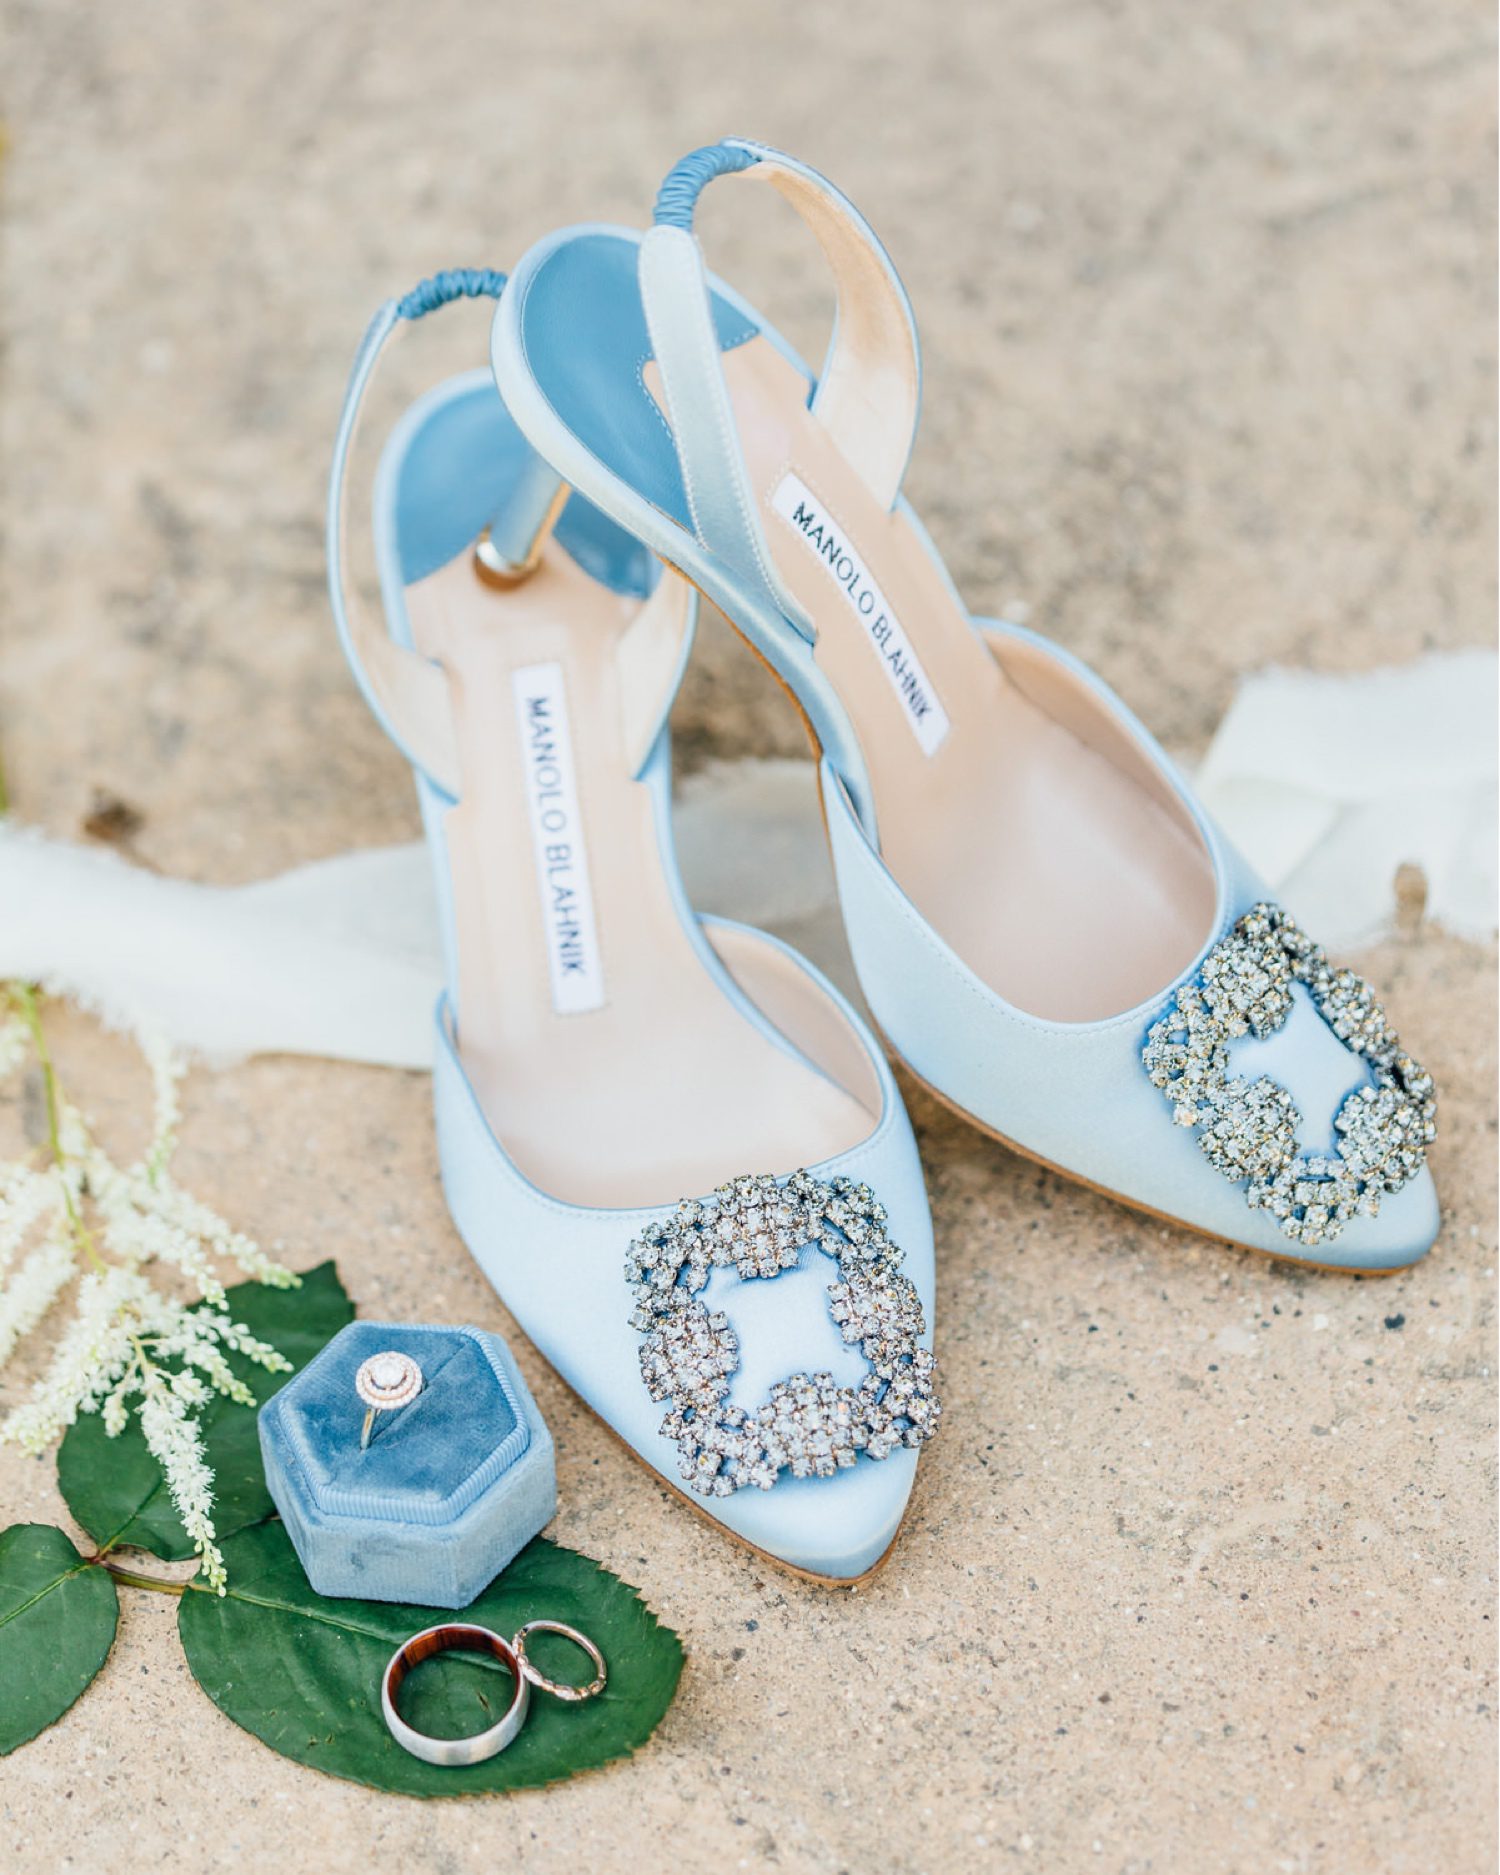 Blue shoes at french castle wedding